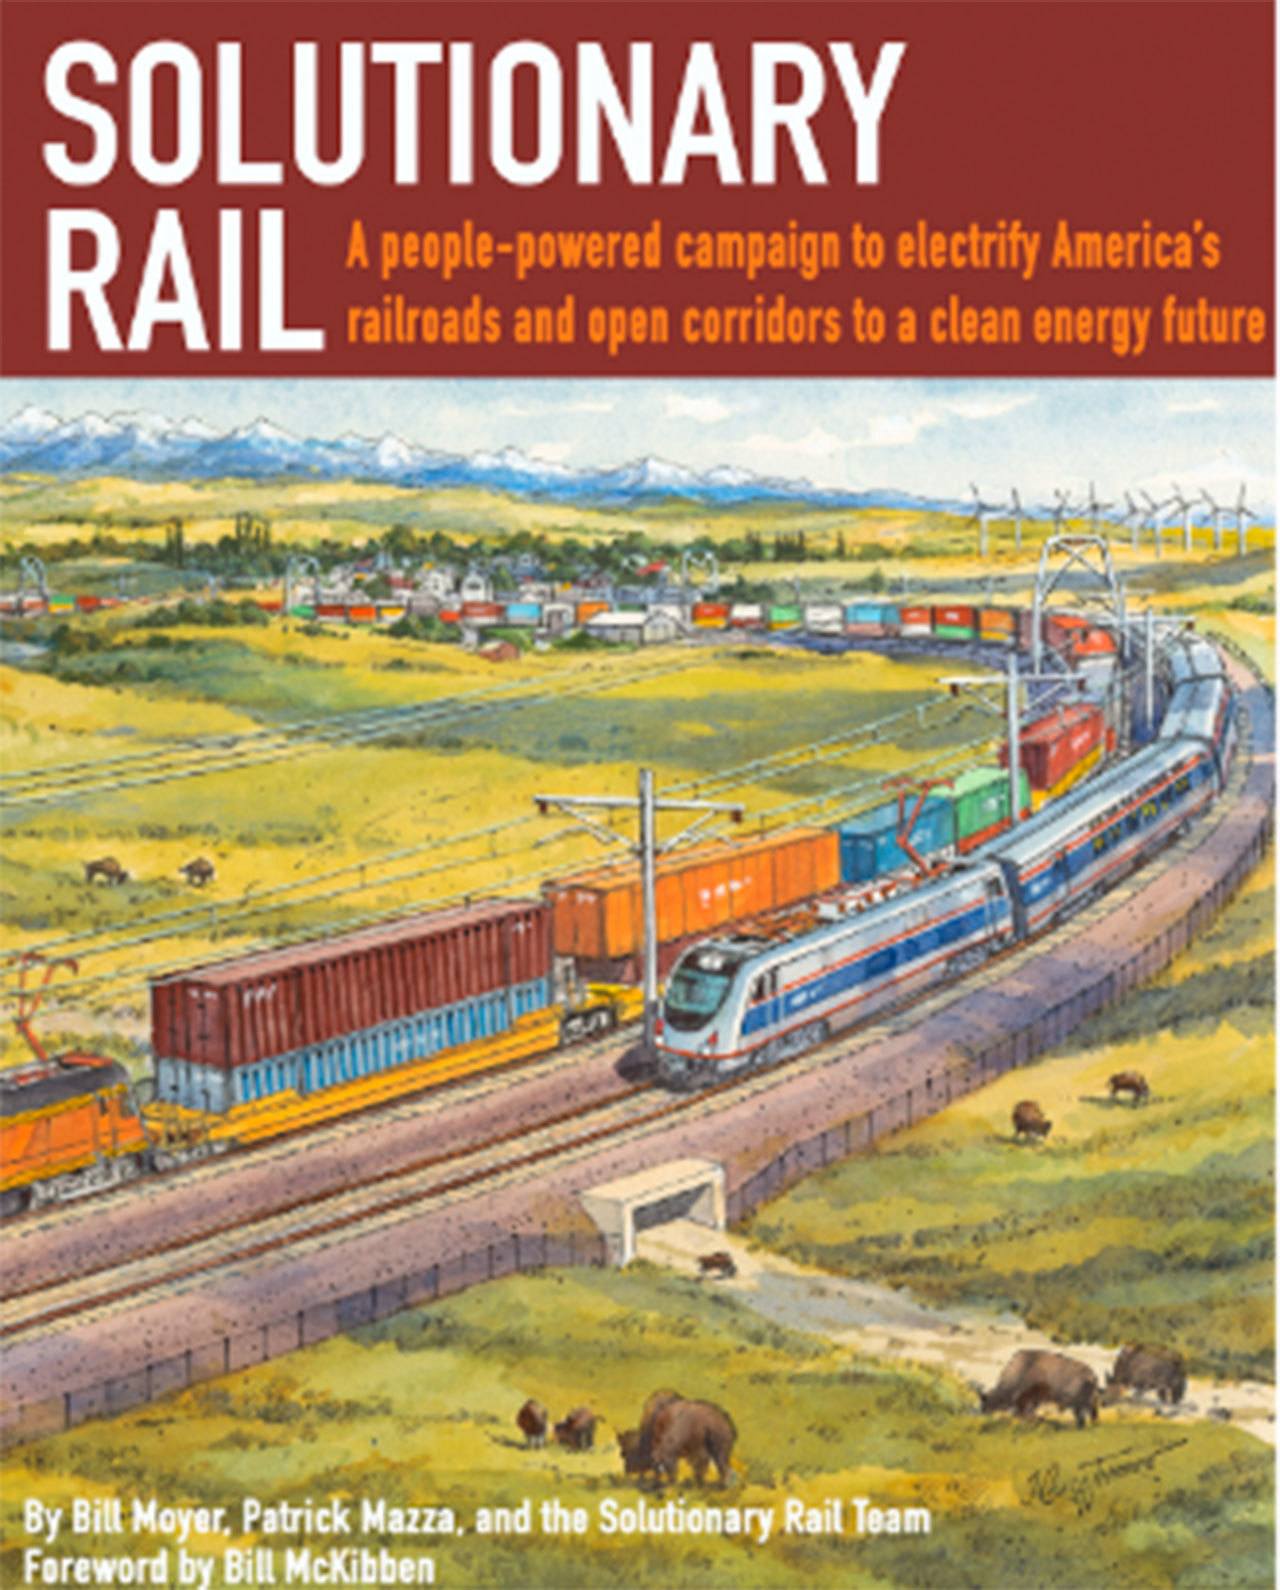 “Solutionary Rail - A people-powered campaign to electrify America’s railroads and open corridors to a clean energy future,” co-authored by Vashon’s Bill Moyer.